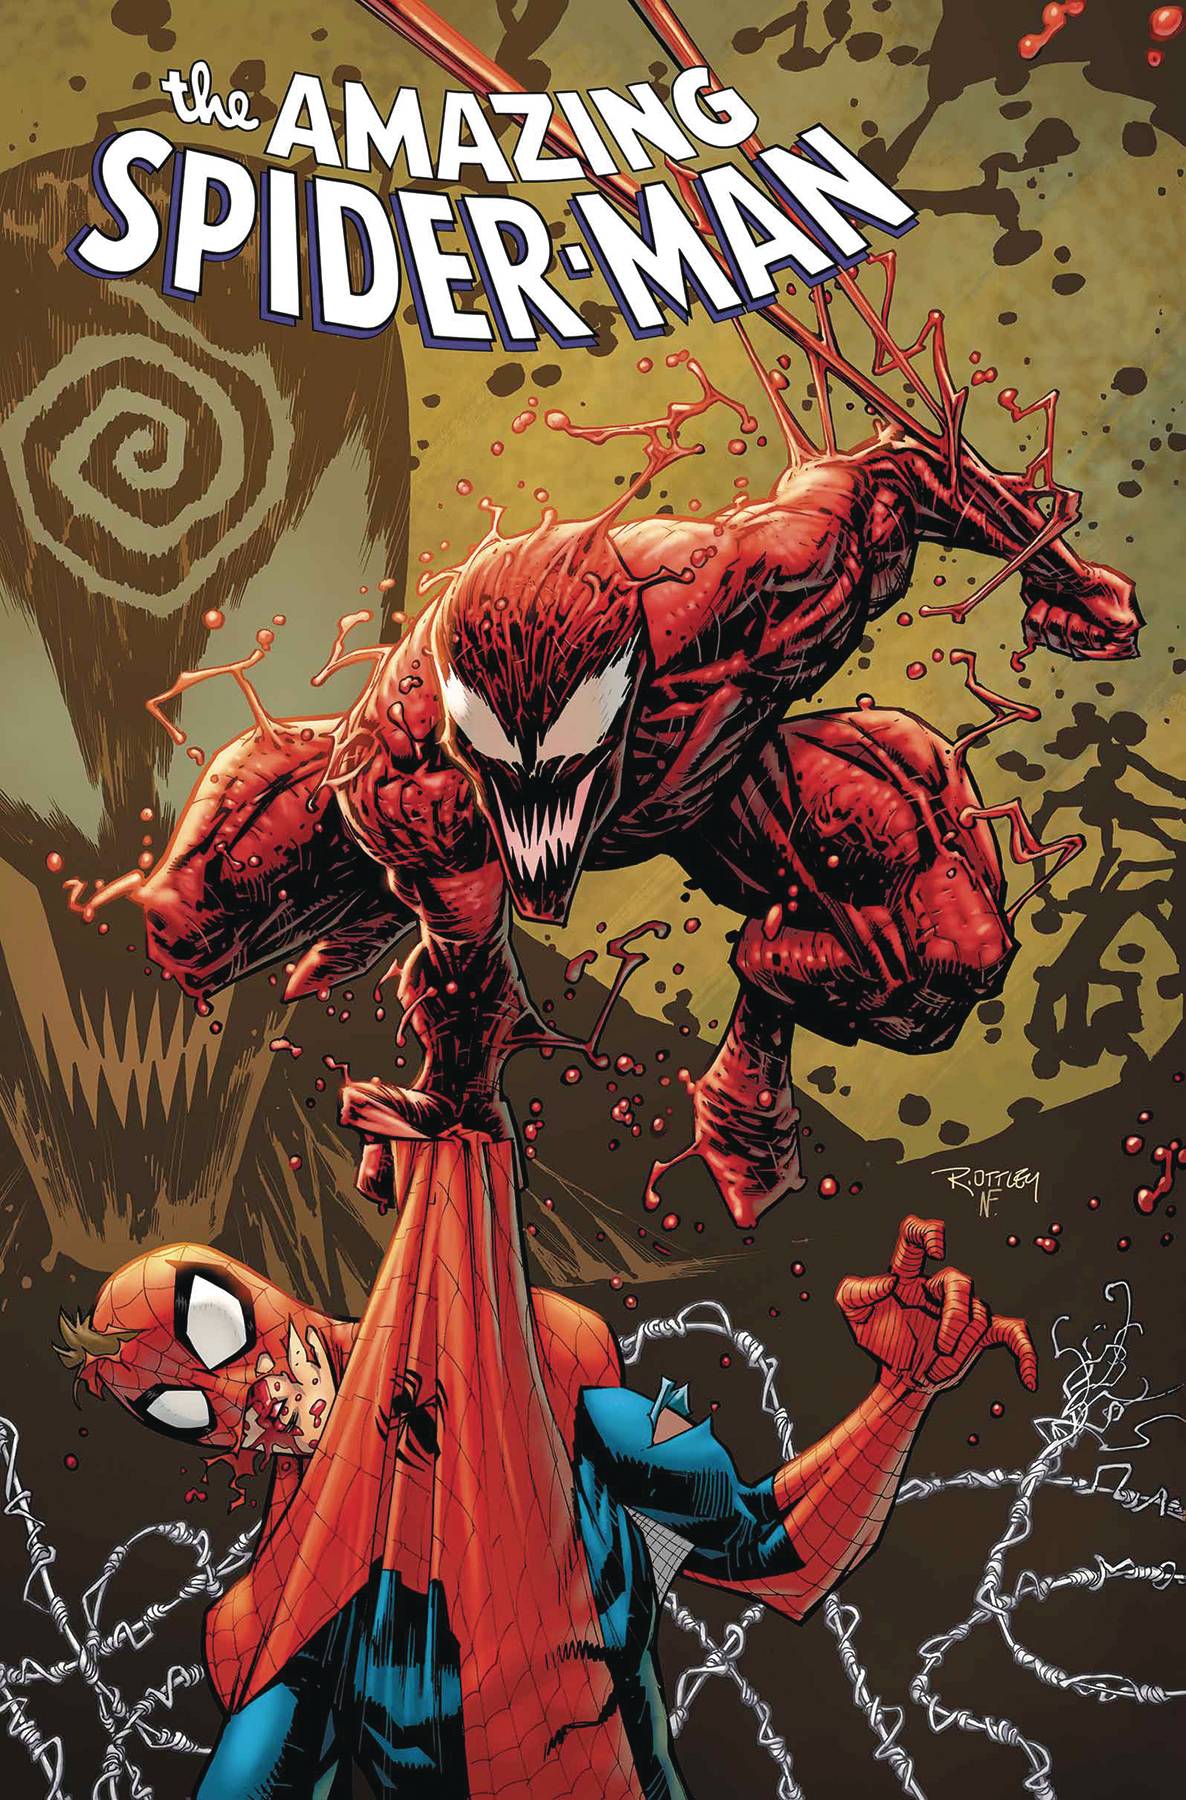 Premire Variant 2018 for sale online Amazing Spider-Man #1 Comic by Ryan Ottley 